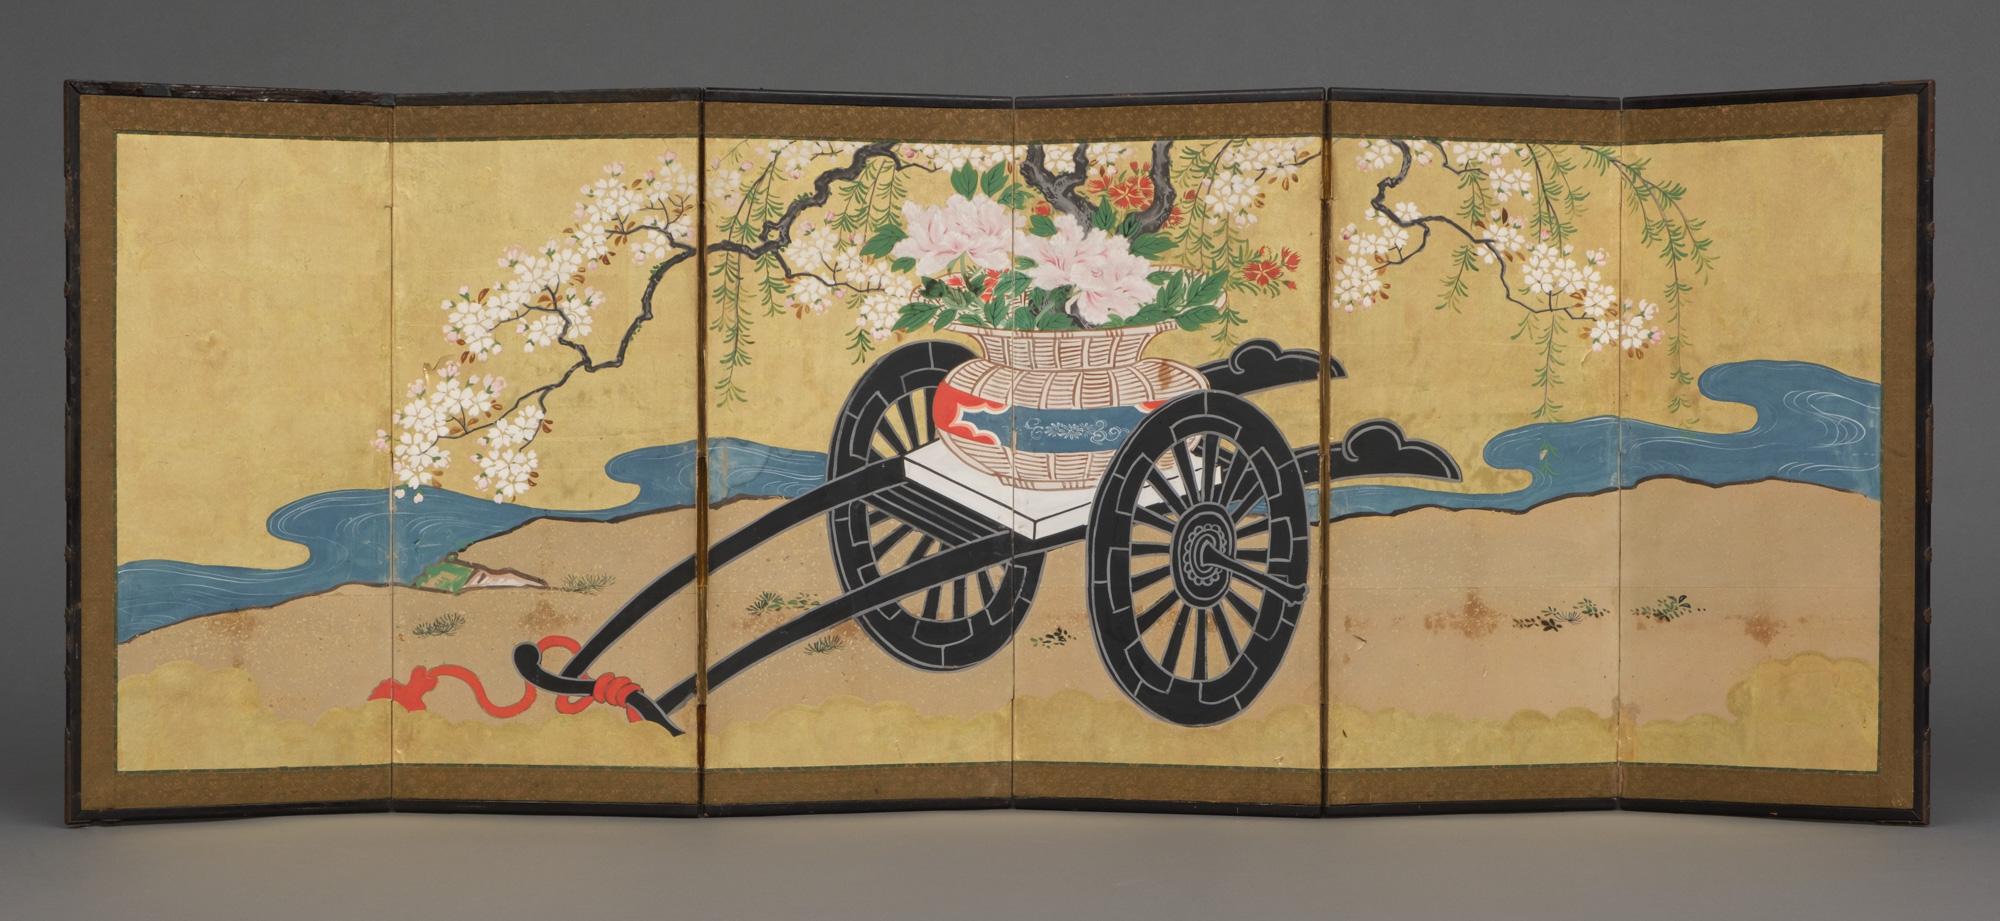 Pair of Japanese hinagata byôbu 雛形屏風 (small folding screens) with flower carts For Sale 5